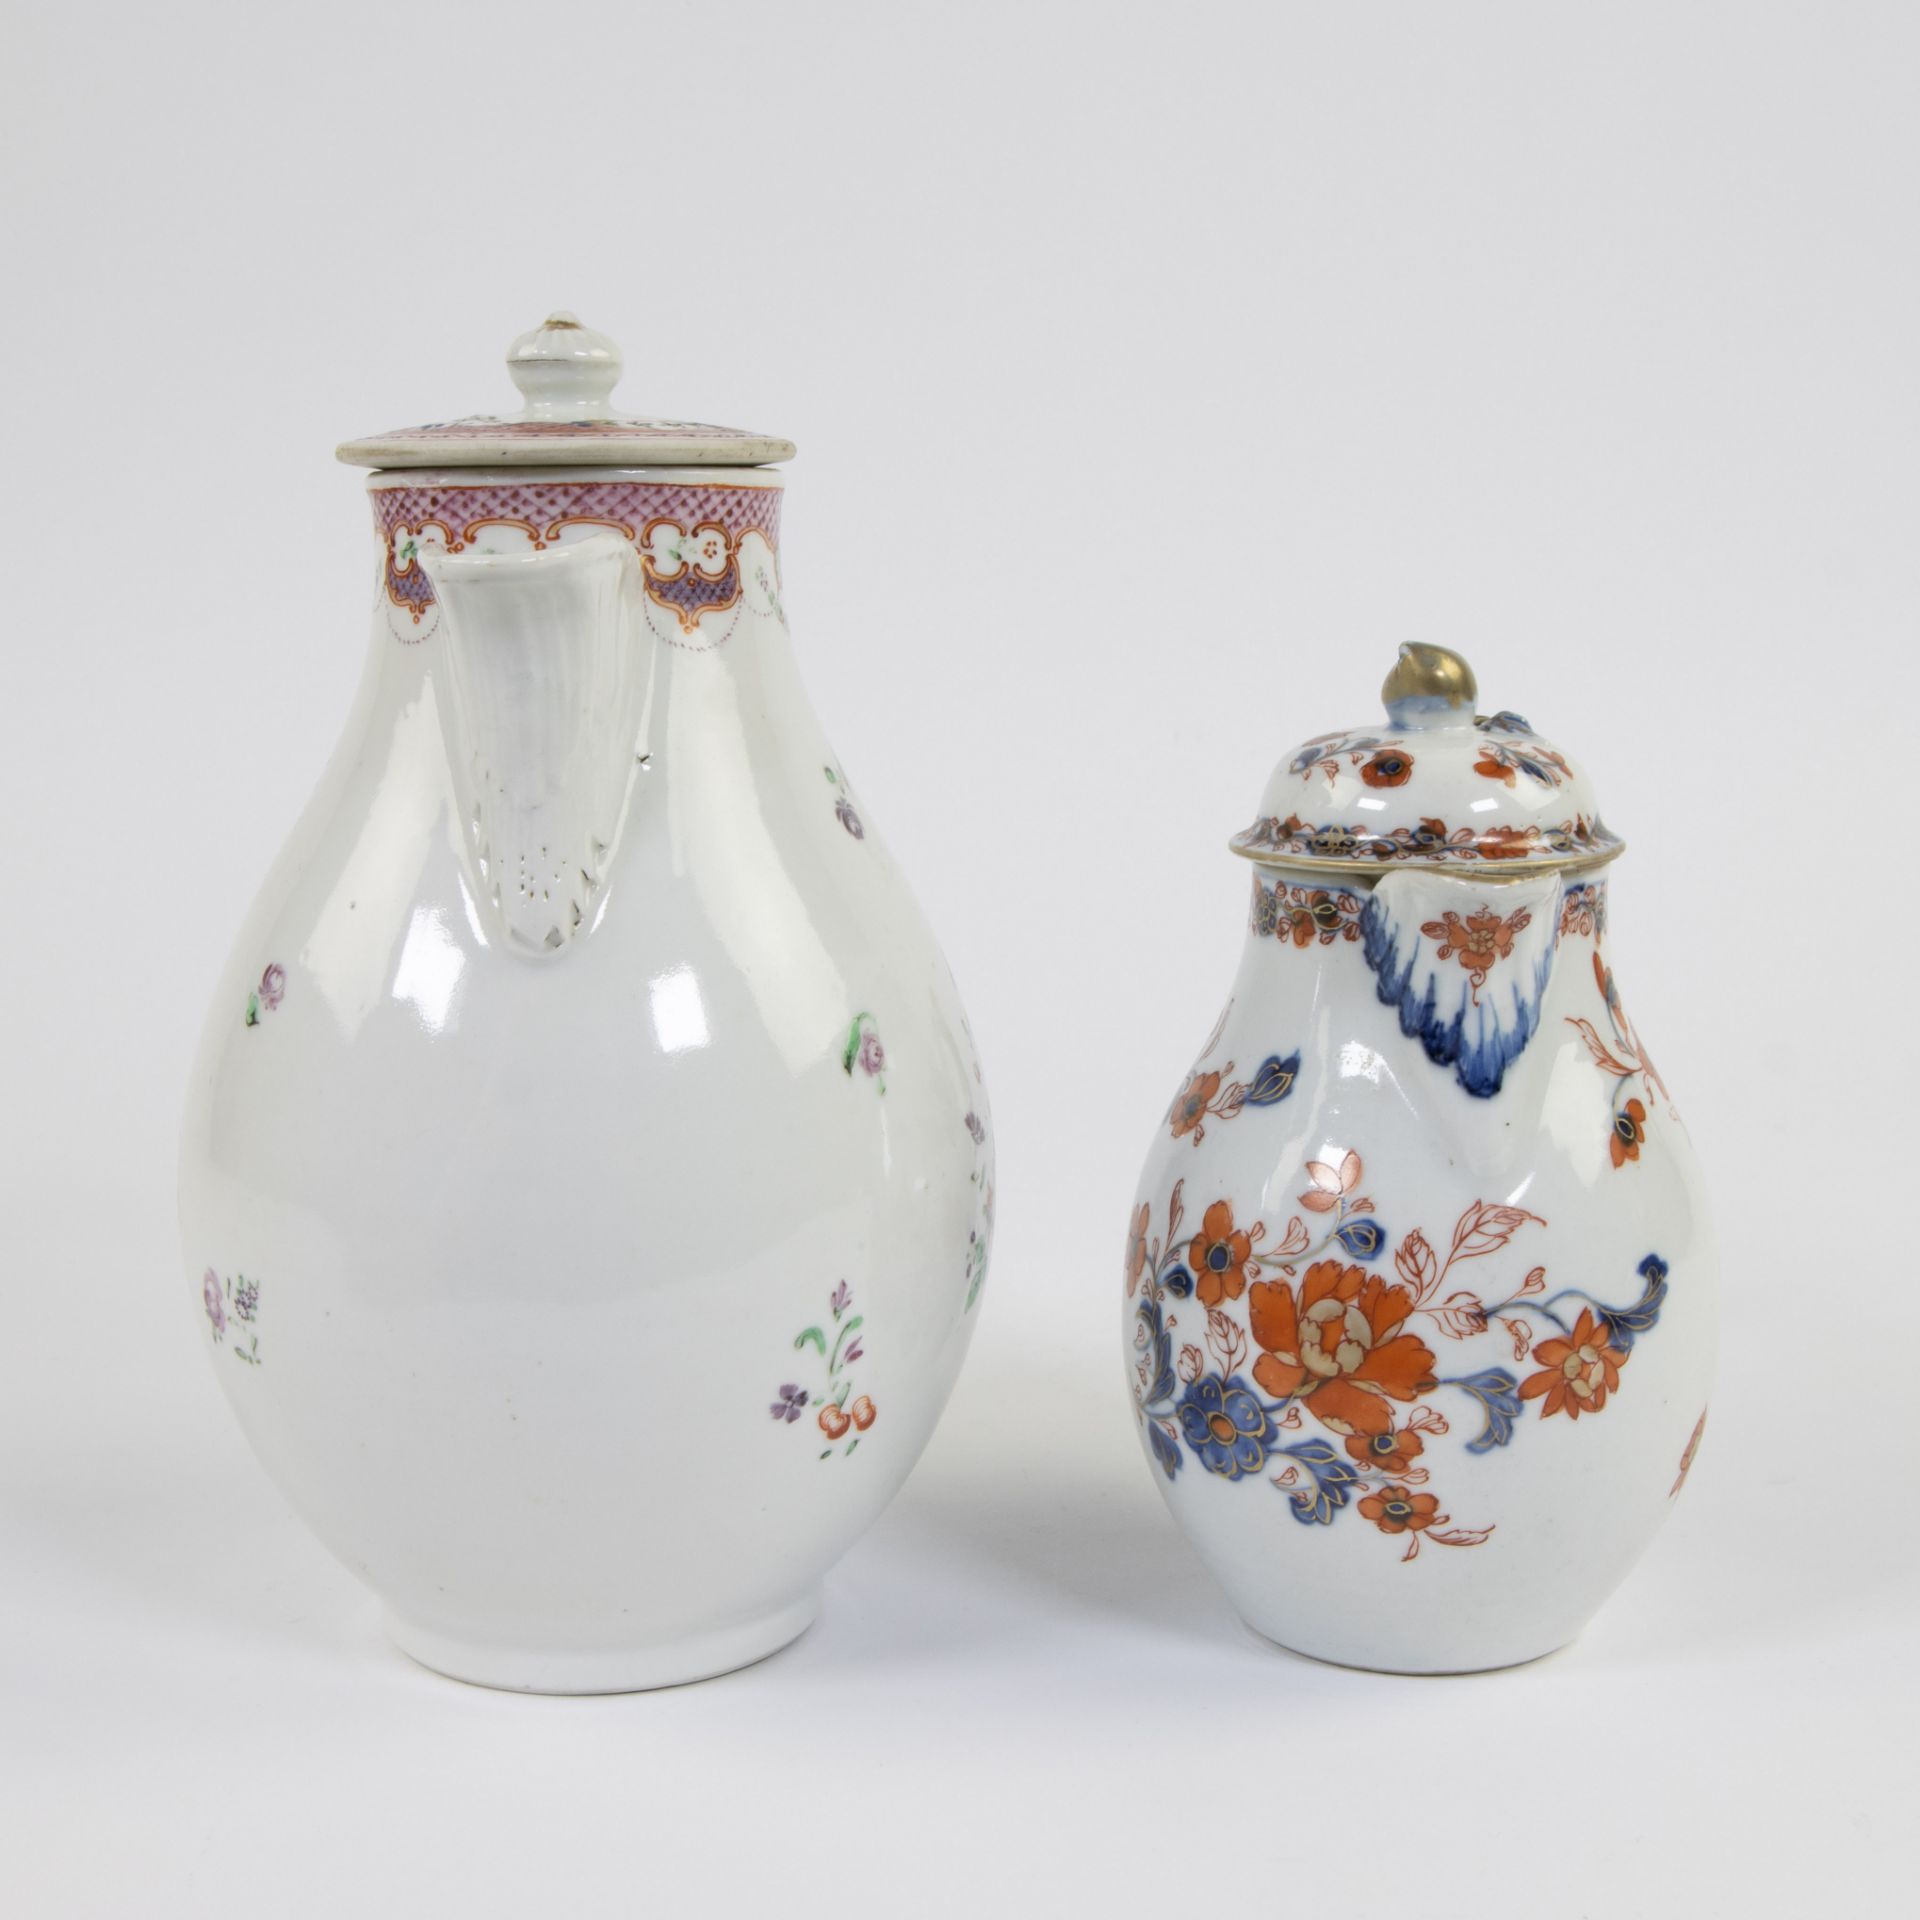 Collection of 2 Chinese teapots famille rose and Imari, 18th century - Image 2 of 8